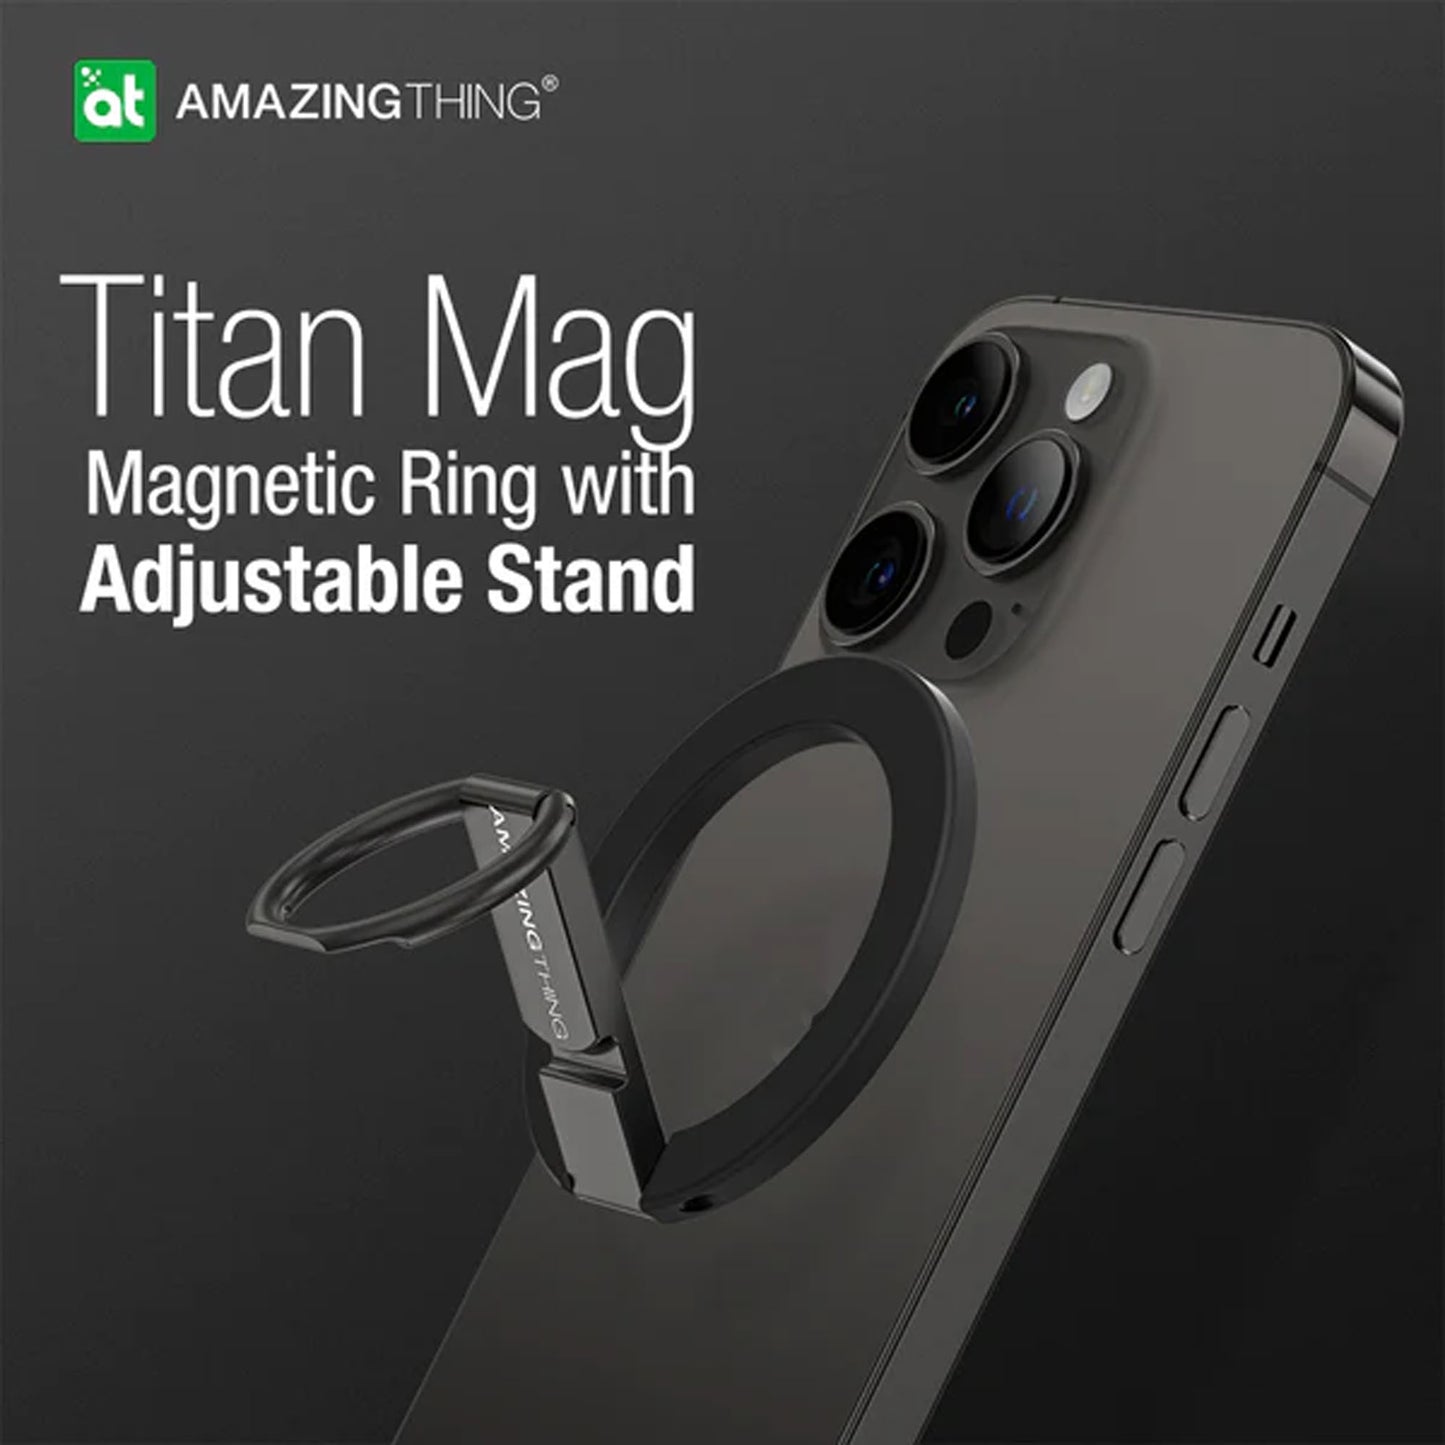 Amazingthing Titan Mag Magnetic Grip with Adjustable Stand - Navy Blue (Barcode : 4892878077620 )